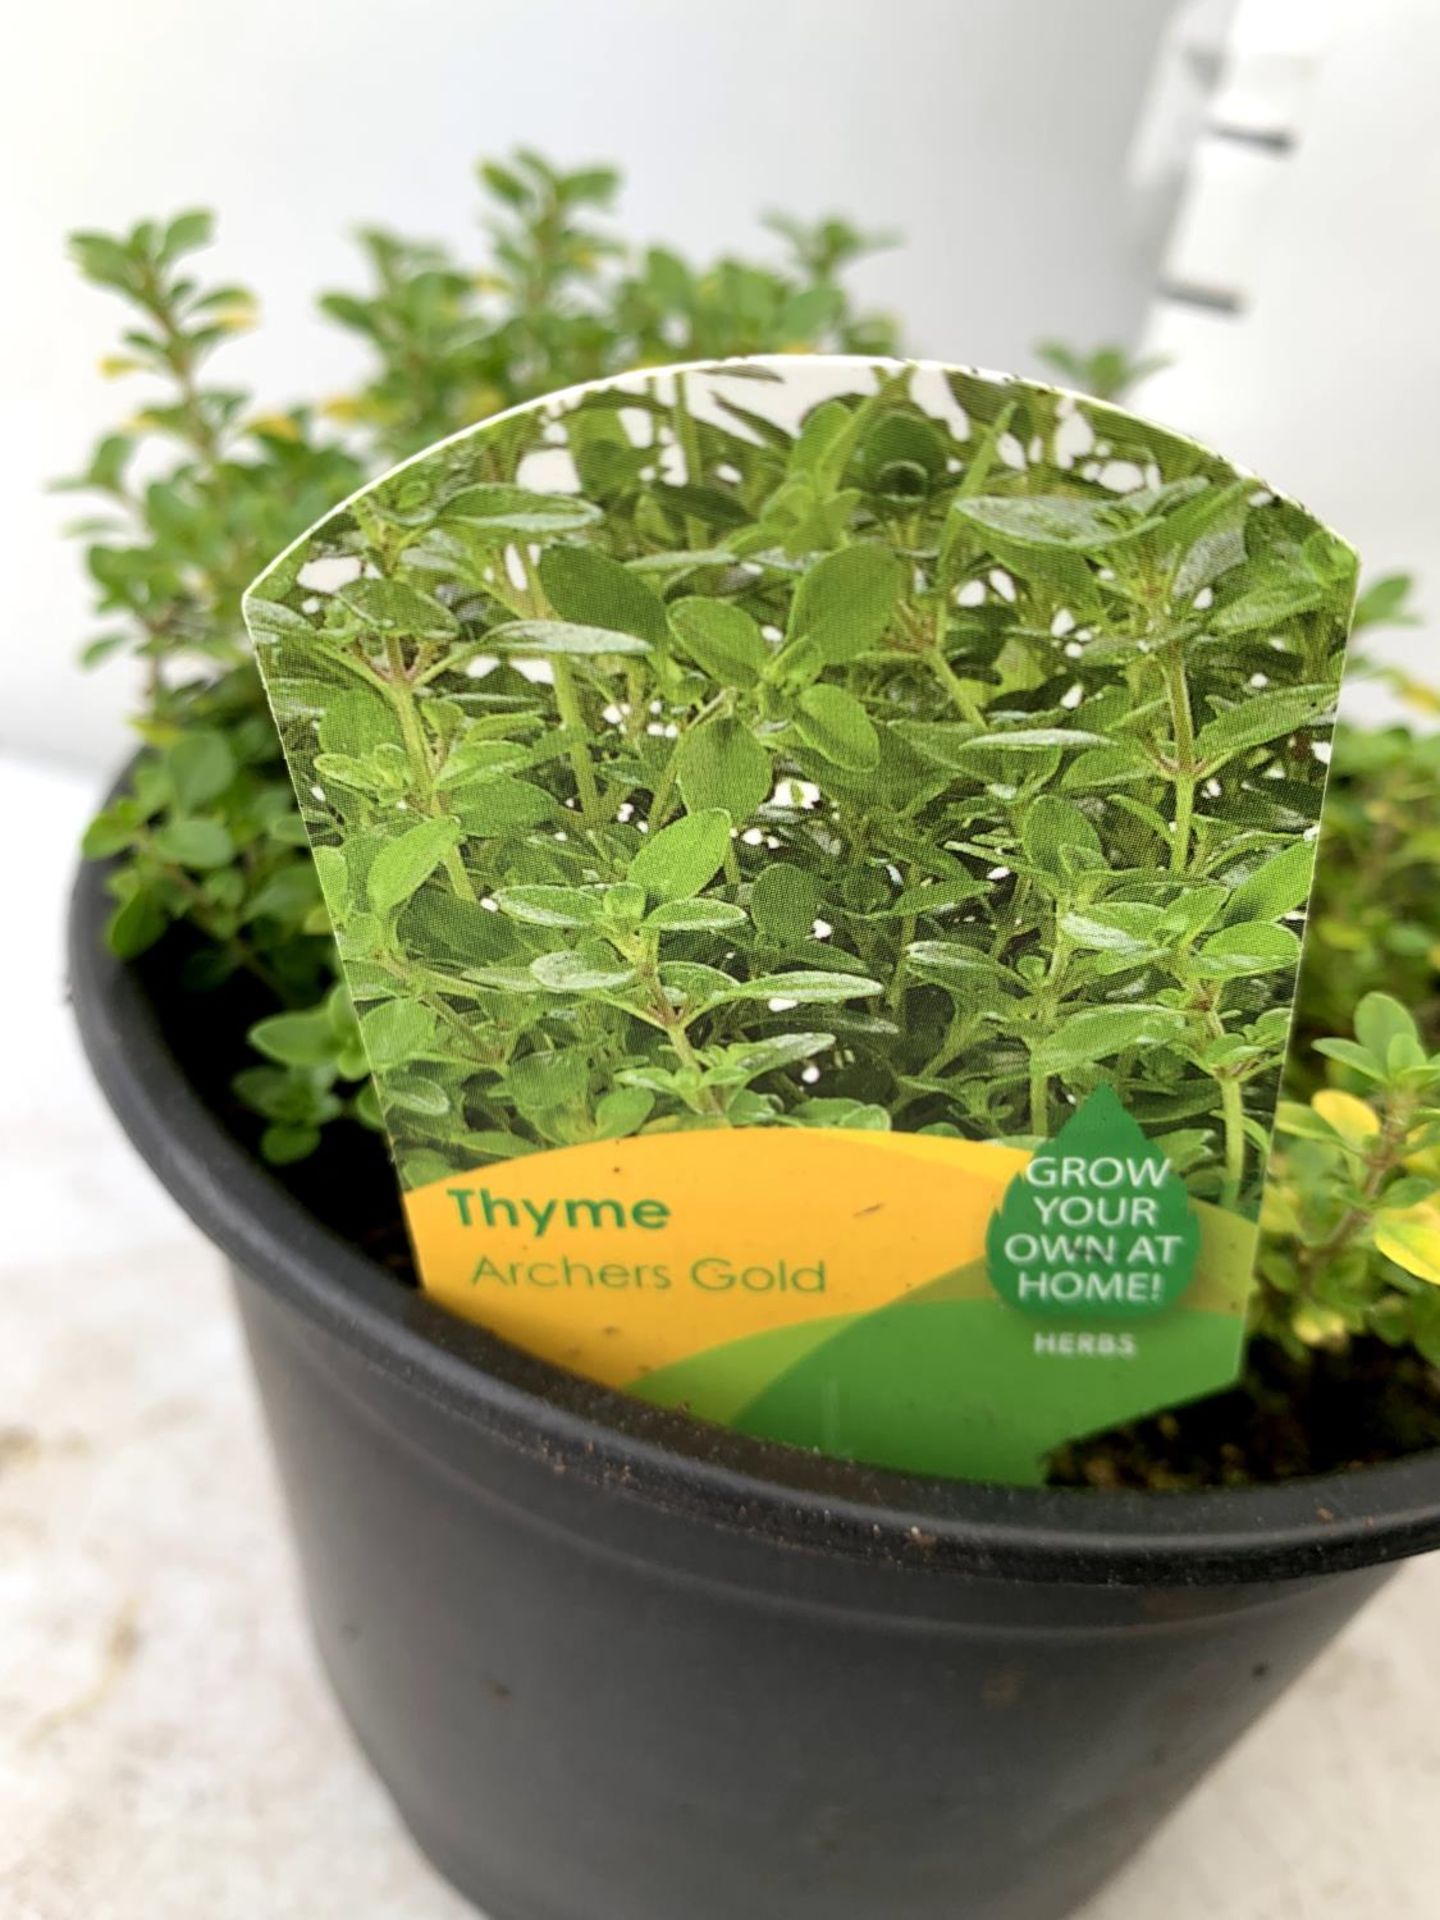 THREE THYME 'ARCHERS GOLD' IN 1 LTR POTS APPROX 20CM IN HEIGHT PLUS VAT TO BE SOLD FOR THE THREE - Image 7 of 8